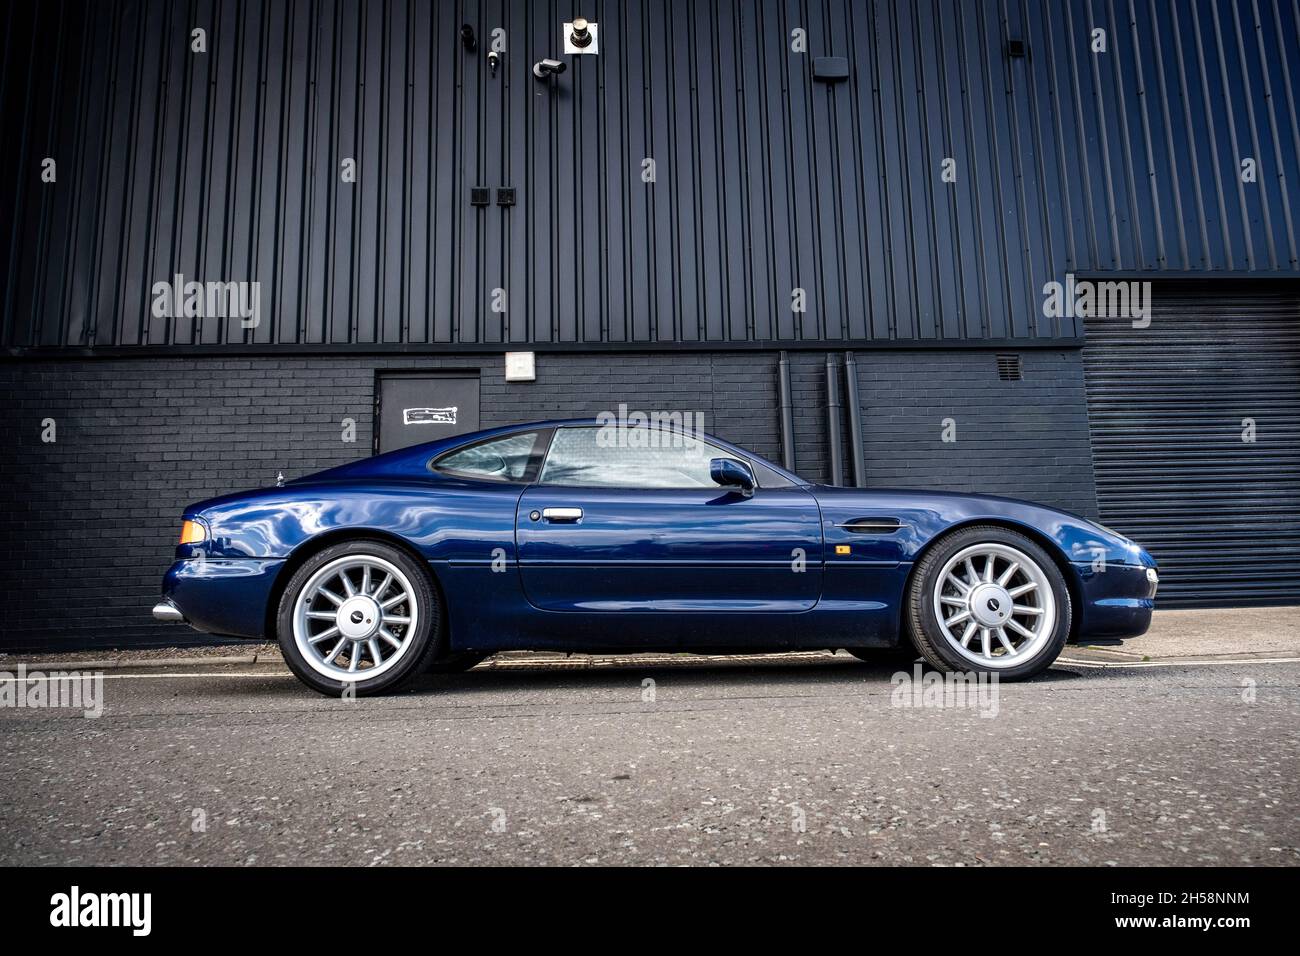 Aston MArtin DB7 parked on an industrial side street Stock Photo